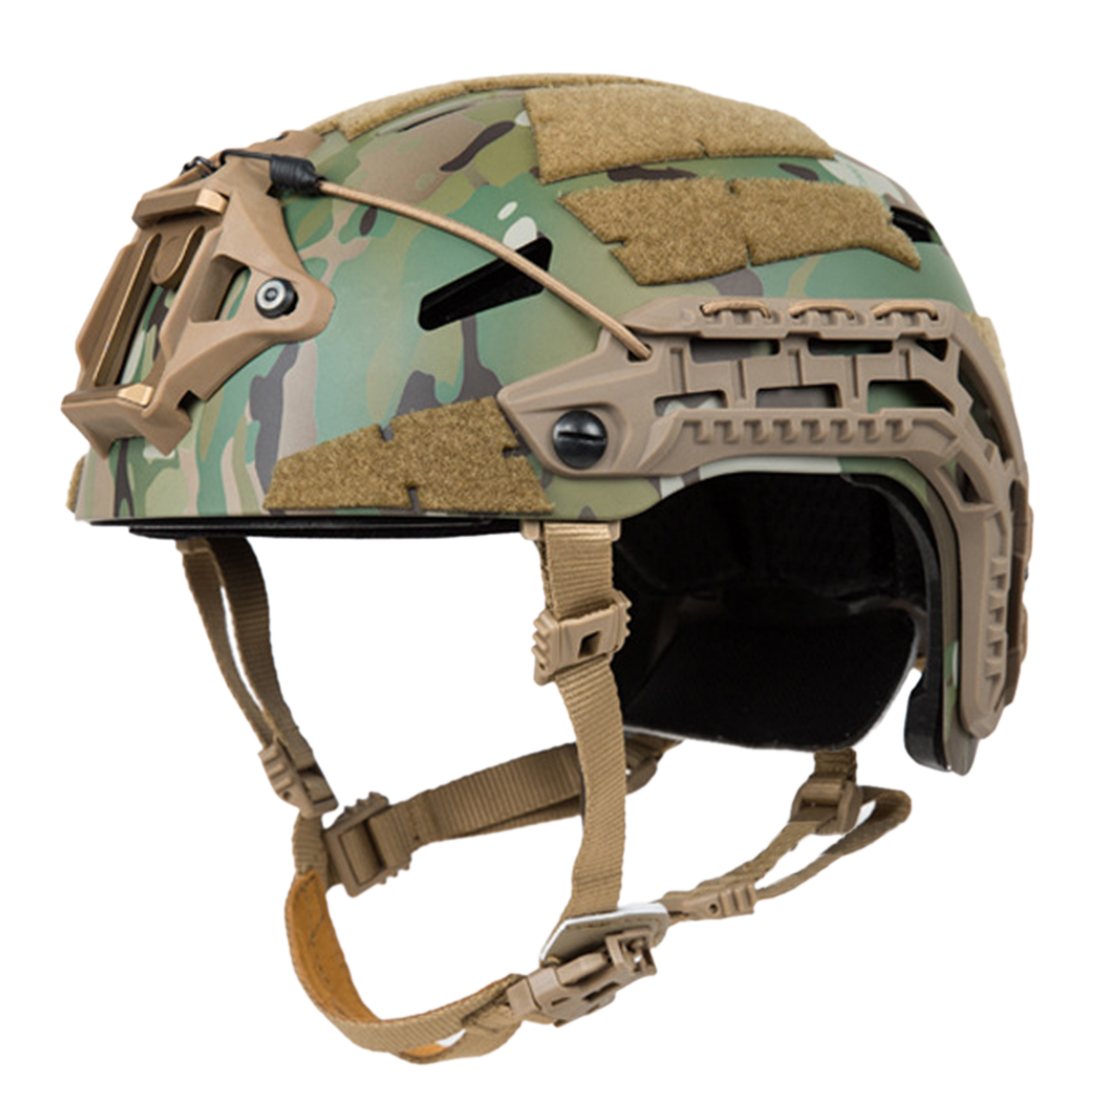 FMA Outdoor Activity Tactical Protective Helmet for 52-62 Head Circumference - Camouflage